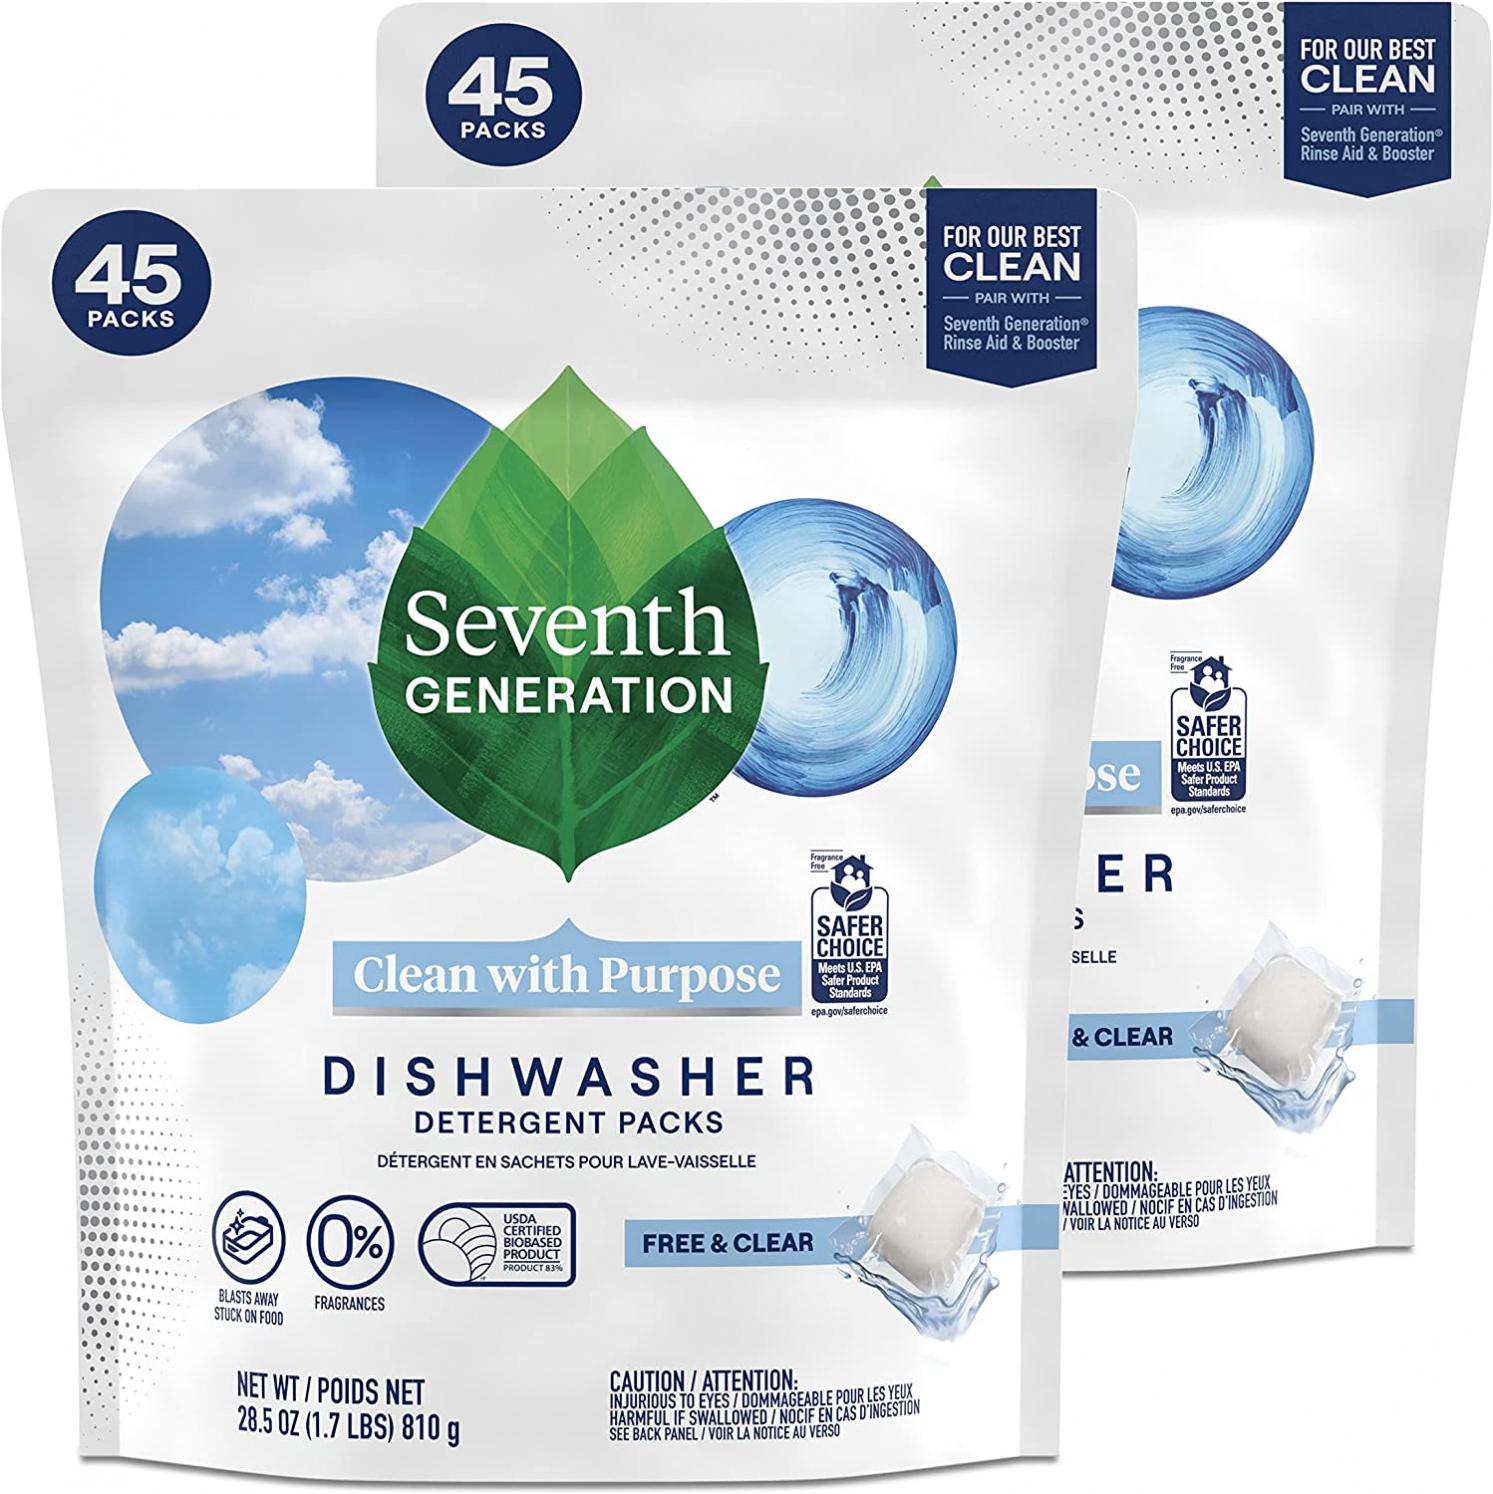 Seventh Generation Dishwasher Detergent Packs for Sparkling Dishes Free & Clear Dishwasher Tabs 45 Count, Pack of 2